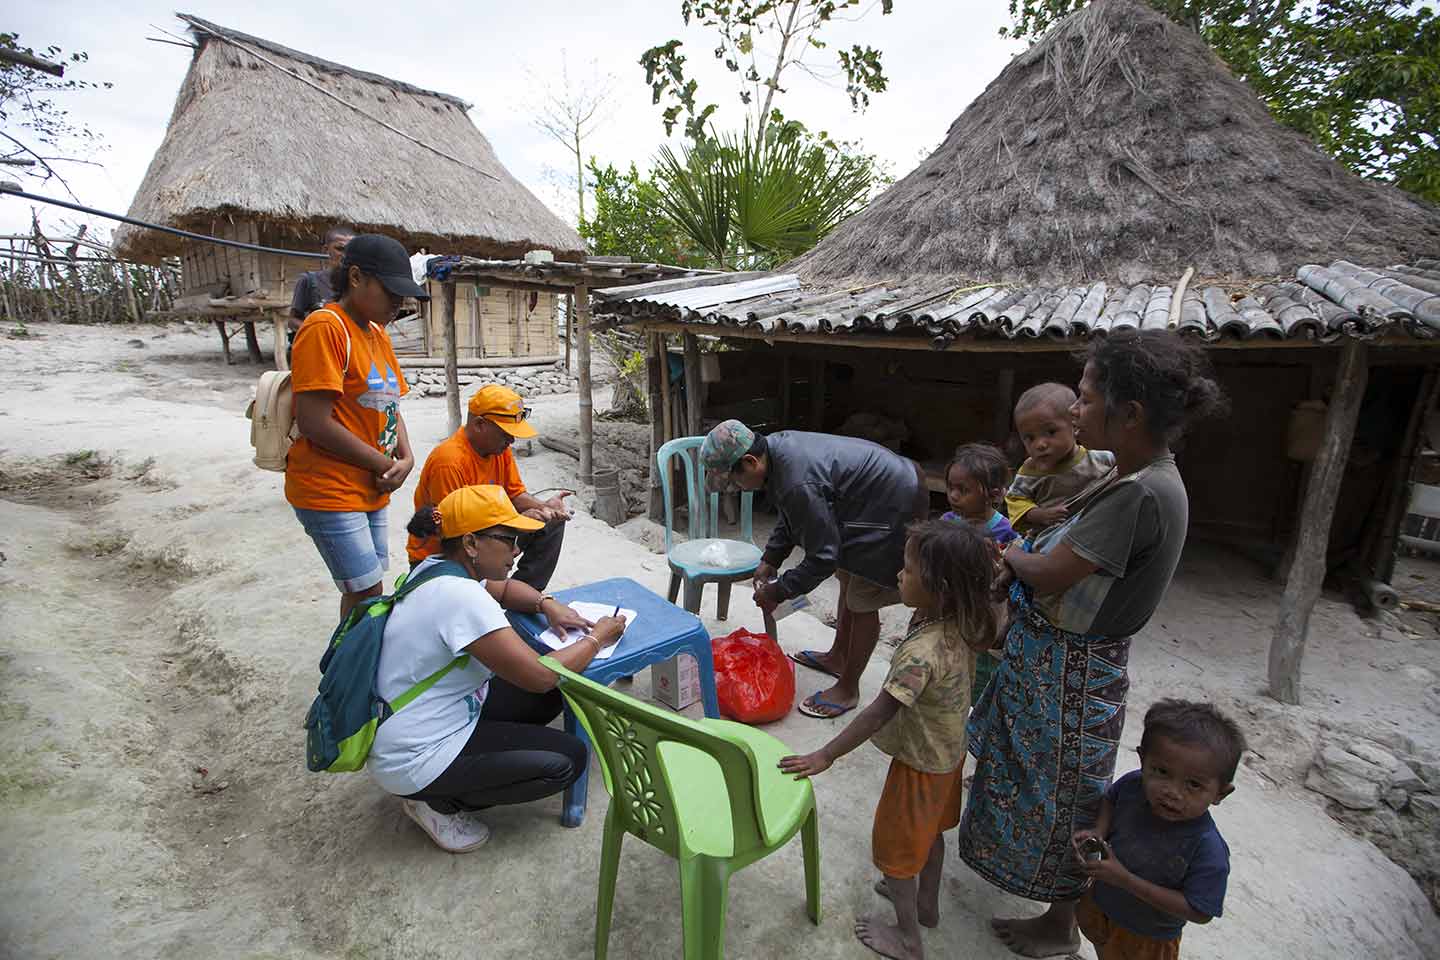 The immunisation team checks a family’s vaccination records during an outreach session in Uaimori Tula village, Viqueque Municipality. © UNICEF Timor-Leste/Soares.